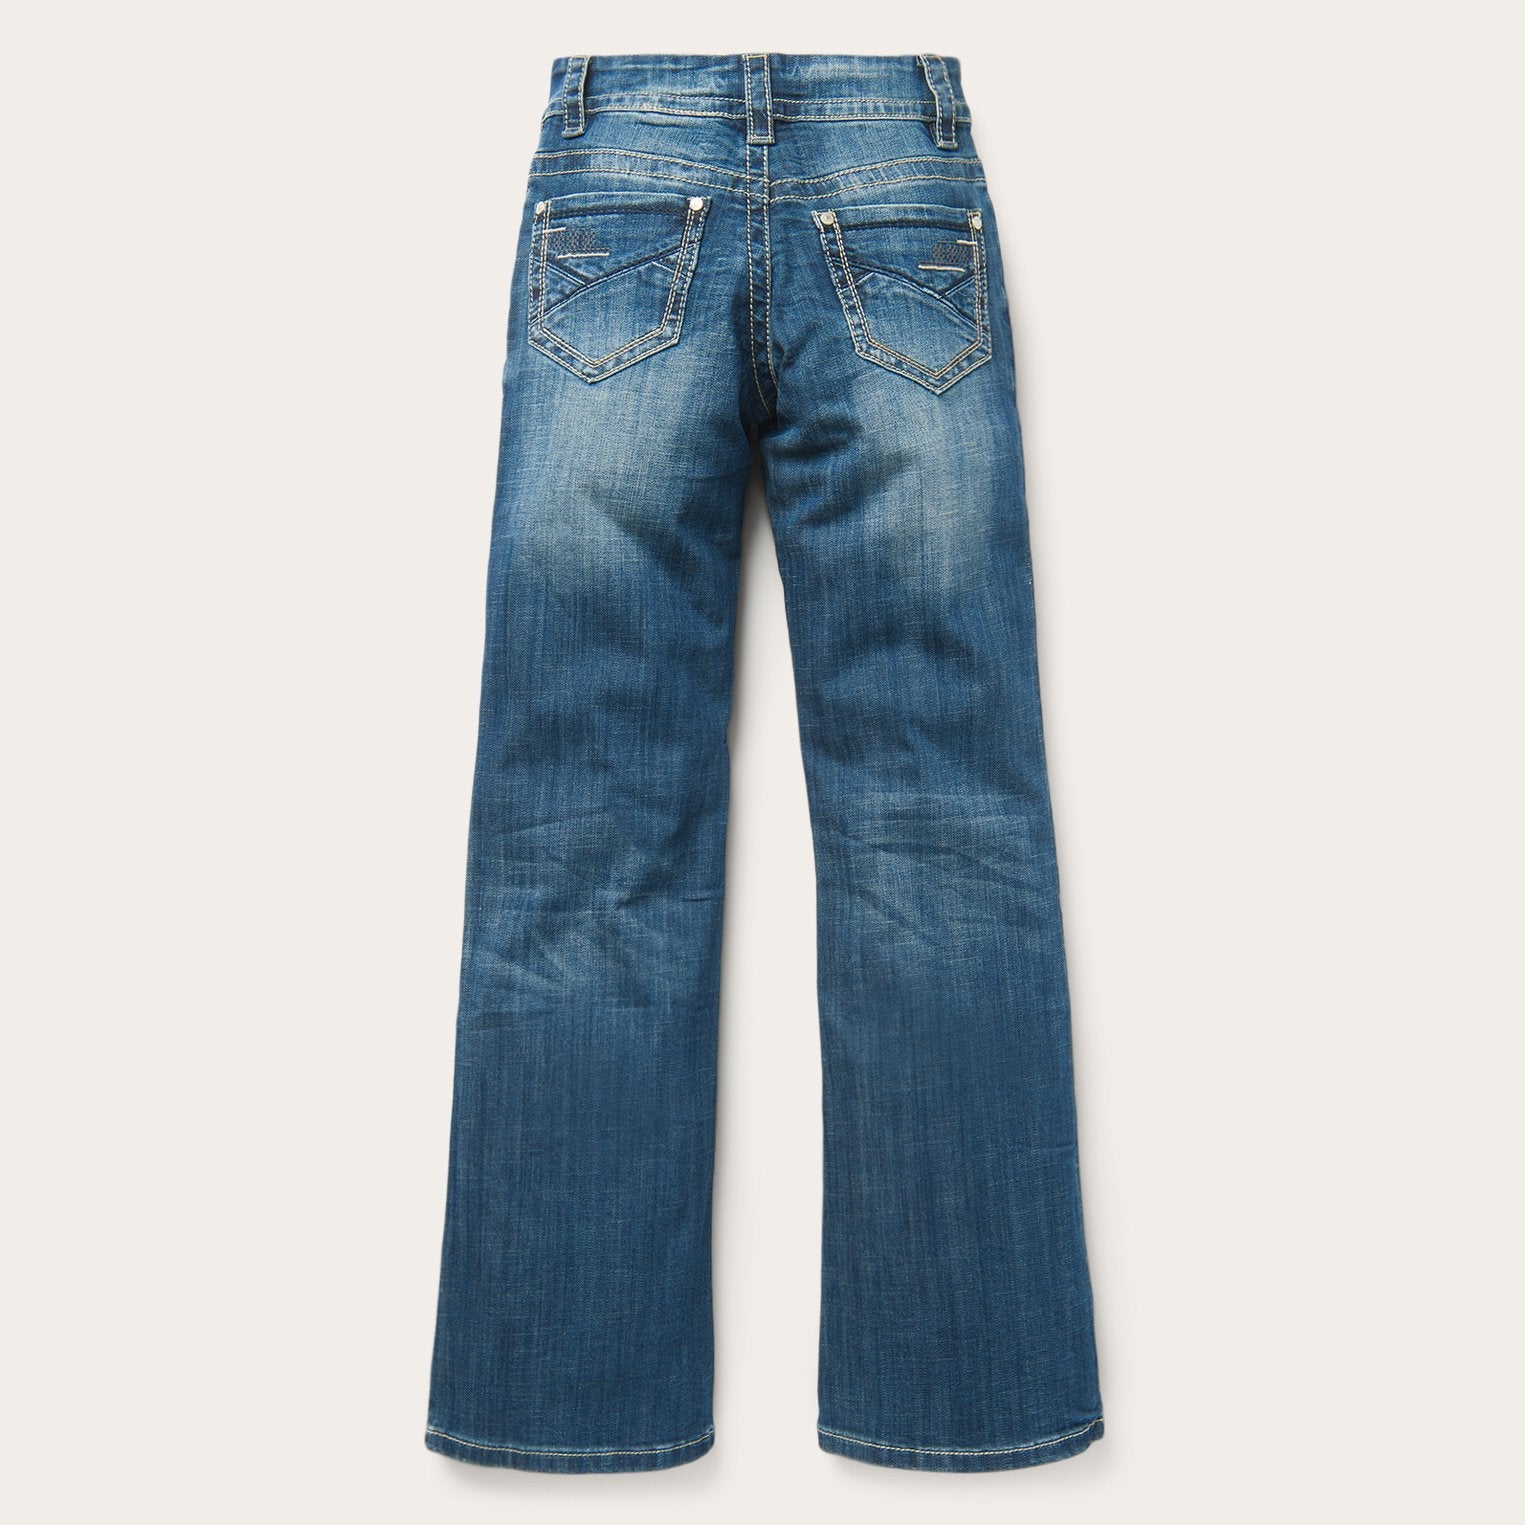 Stetson 214 Trouser Fit Jean With Deco Back Pocket